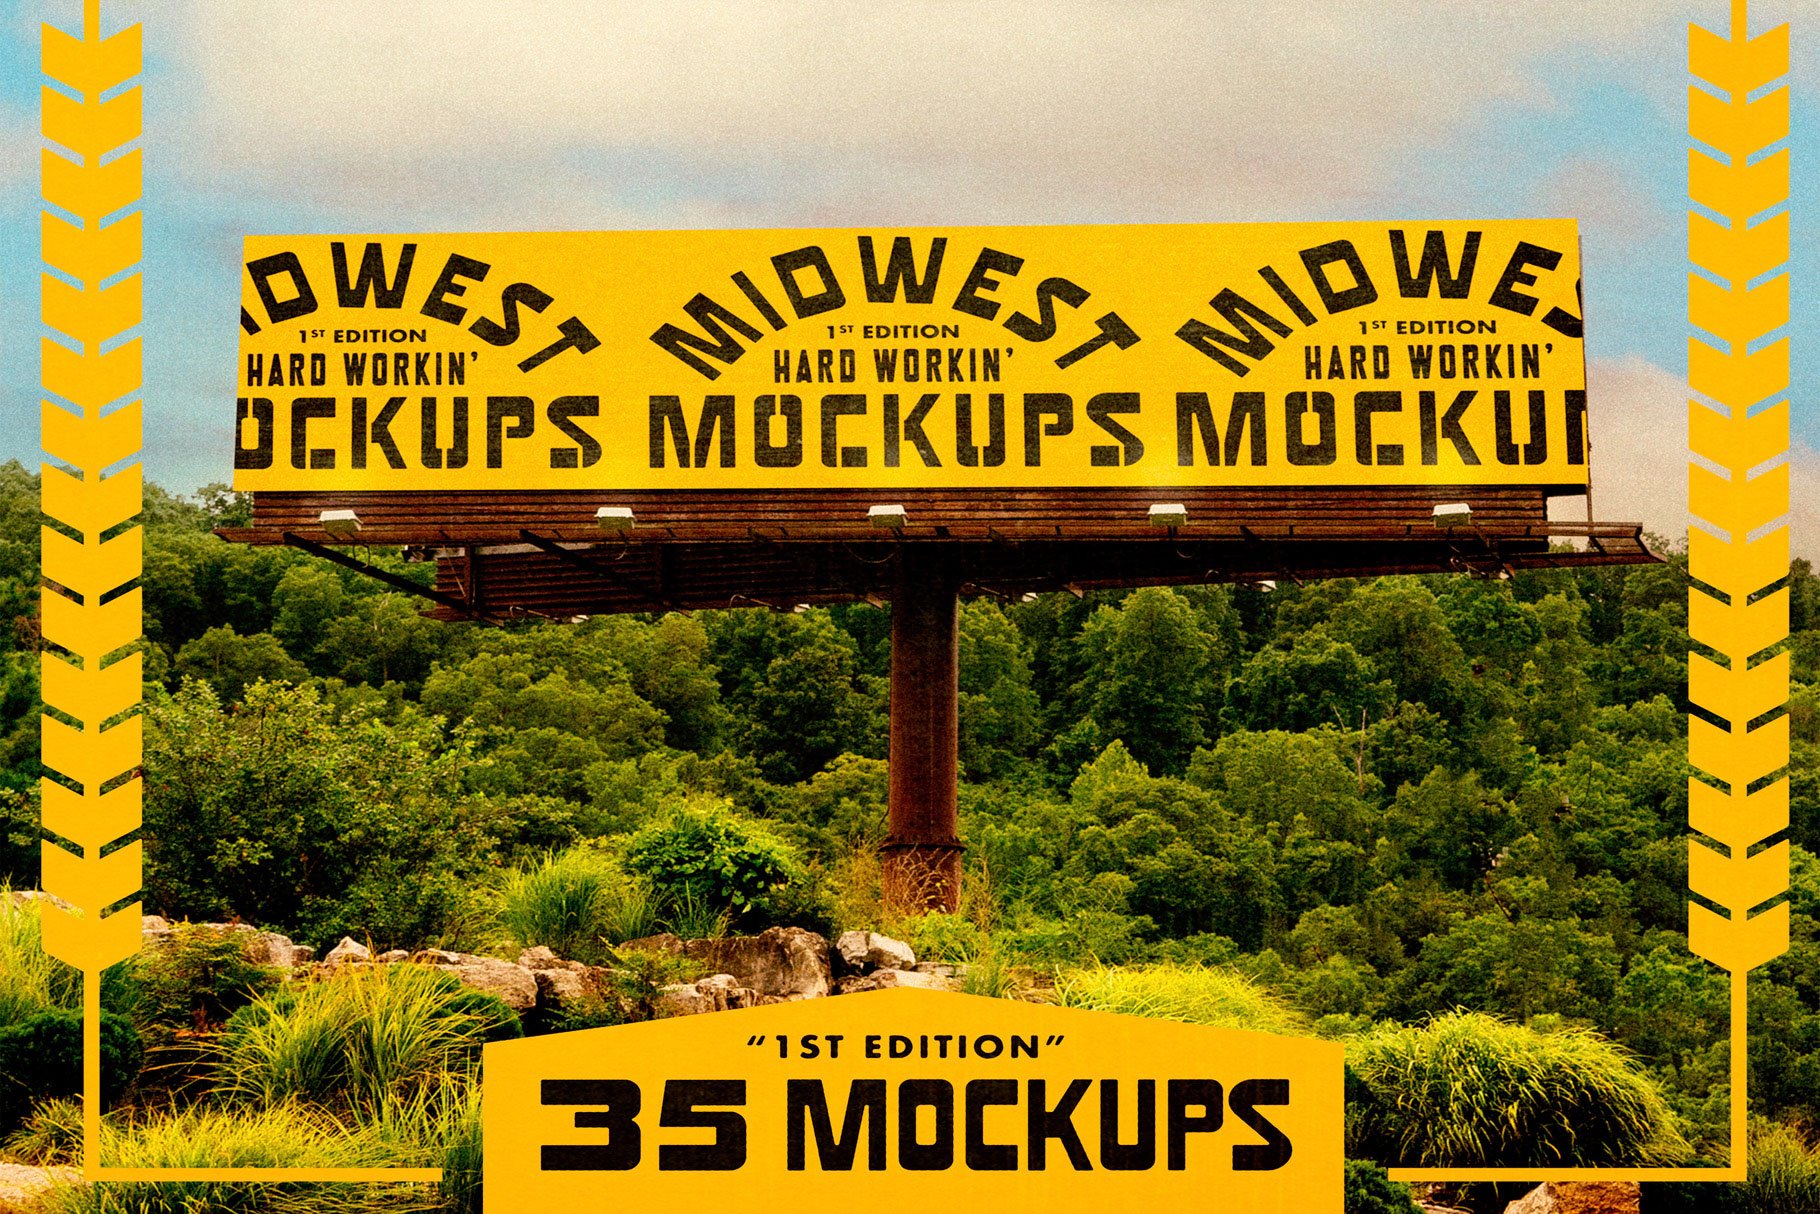 MIDWEST MOCKUPS 1ST EDITION cover image.